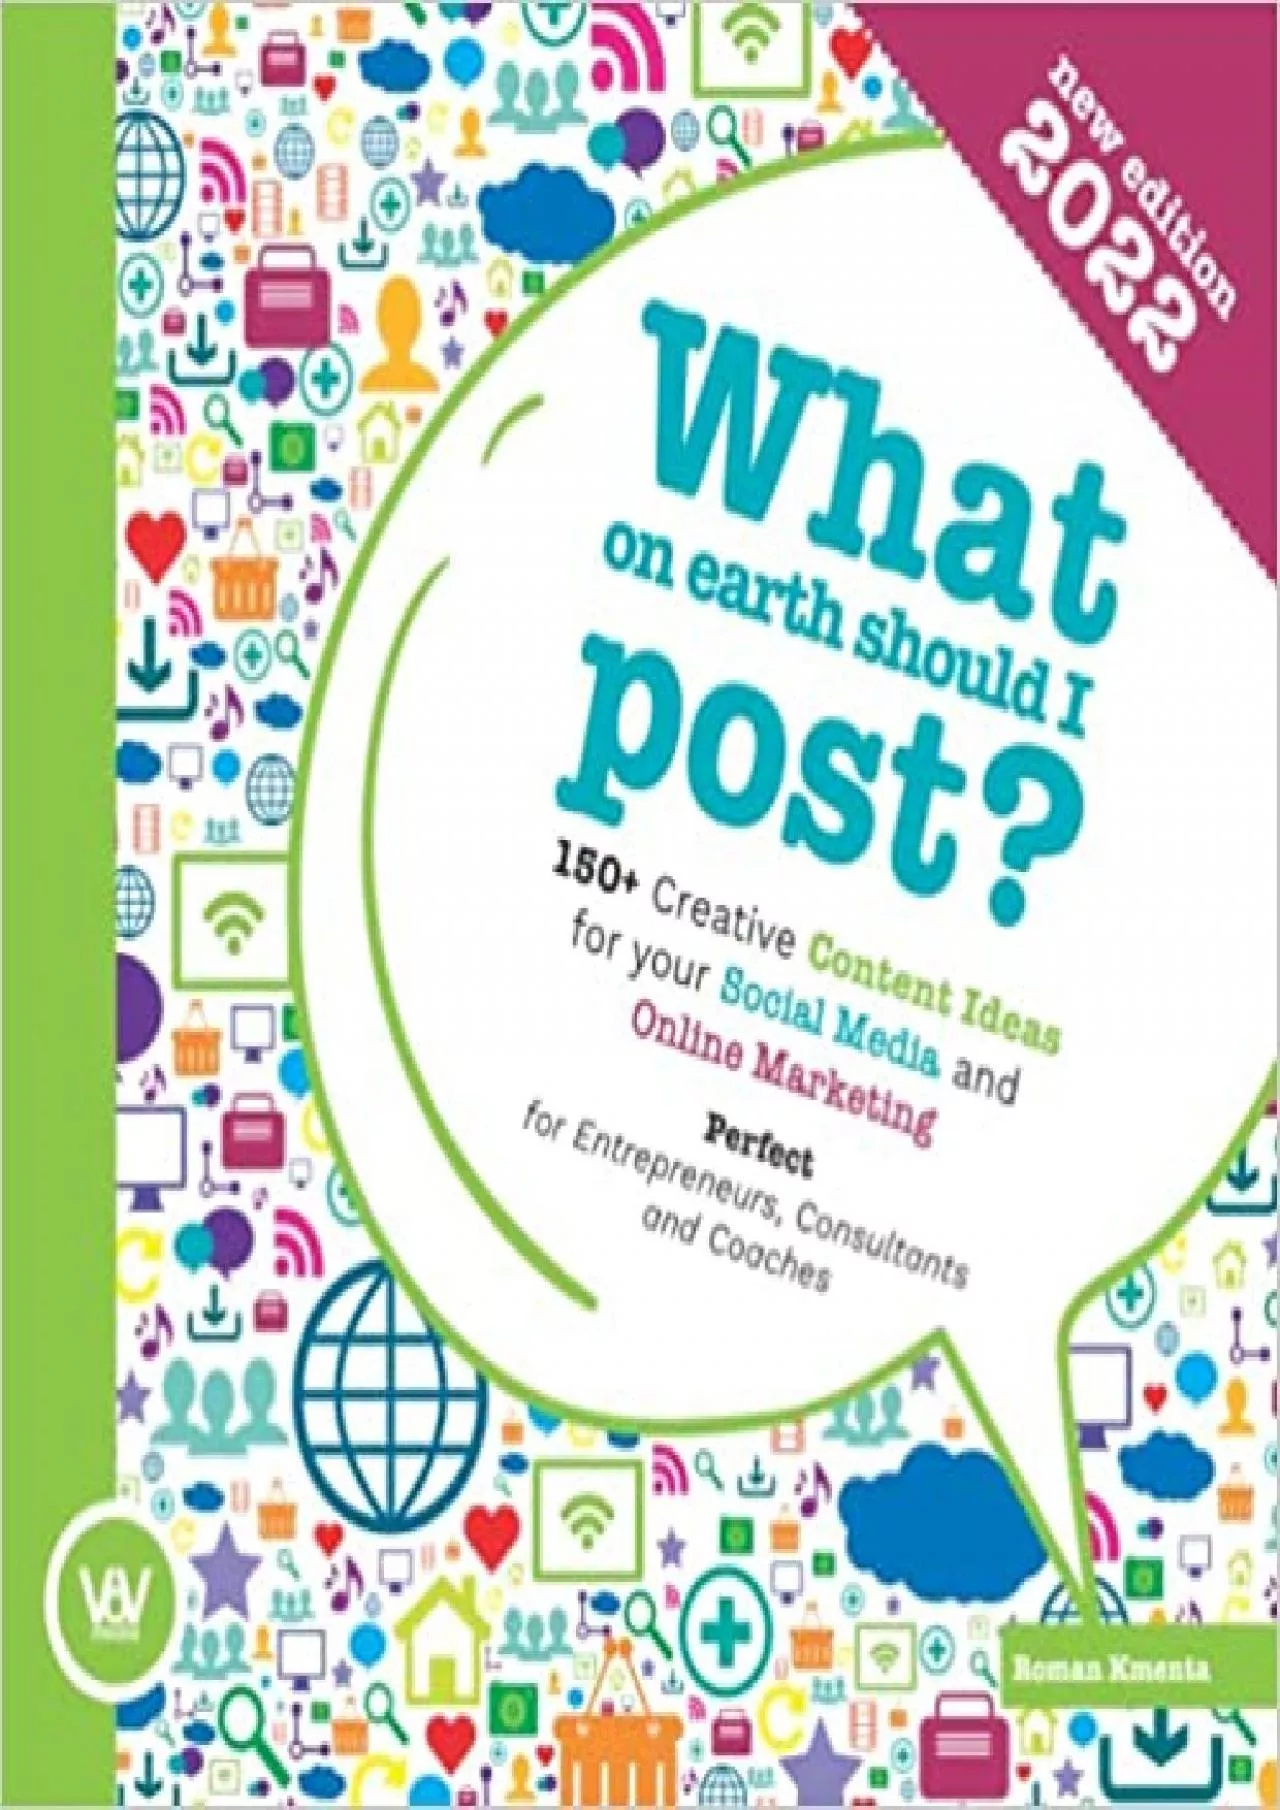 What on earth should I post? - 150+ Creative Content Ideas for your Social Media and Online